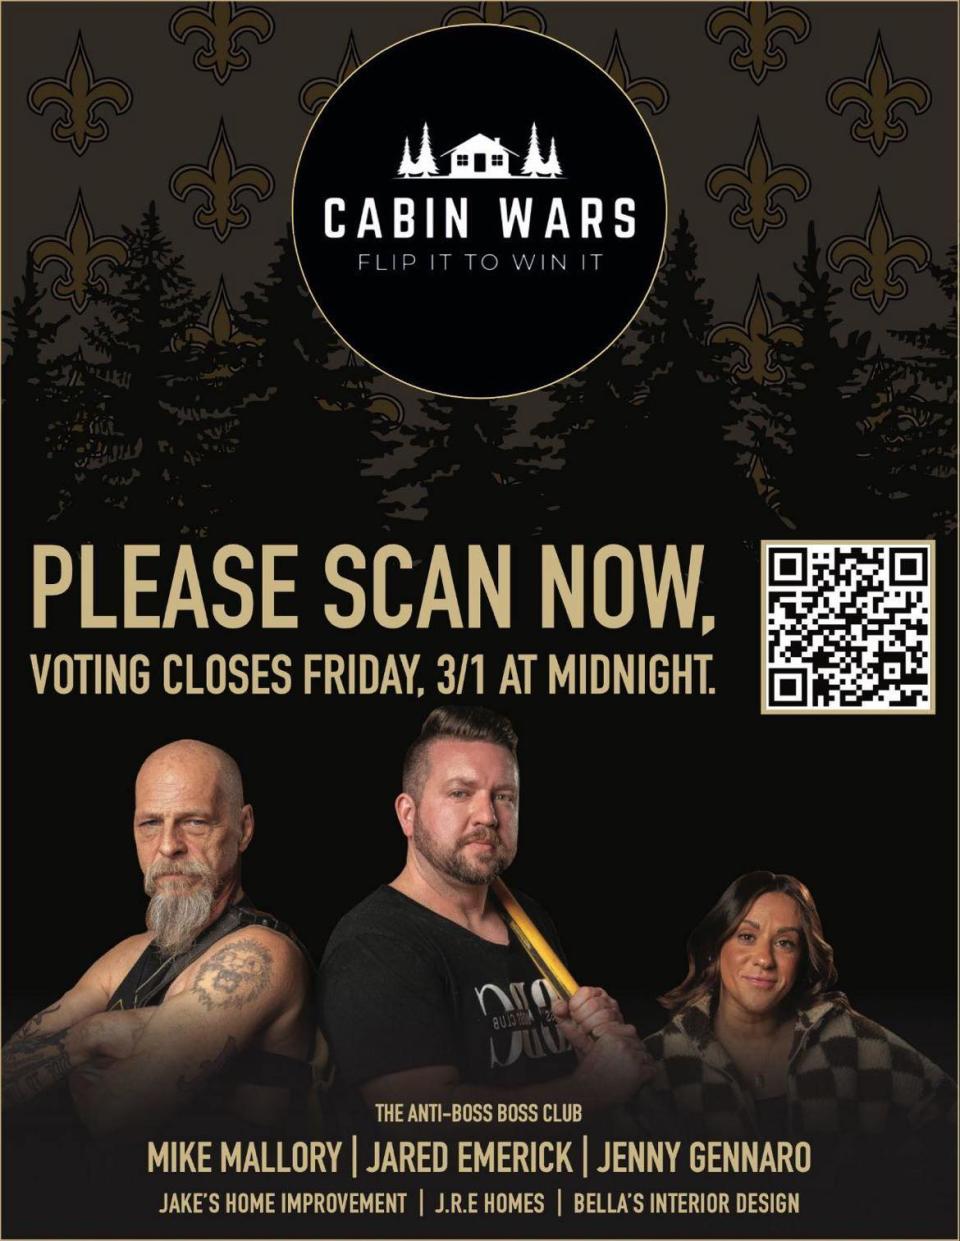 Stark County resident Jared Emerick competed on the reality television show, "Cabin Wars." Episodes will be streamed this spring on Amazon Prime.